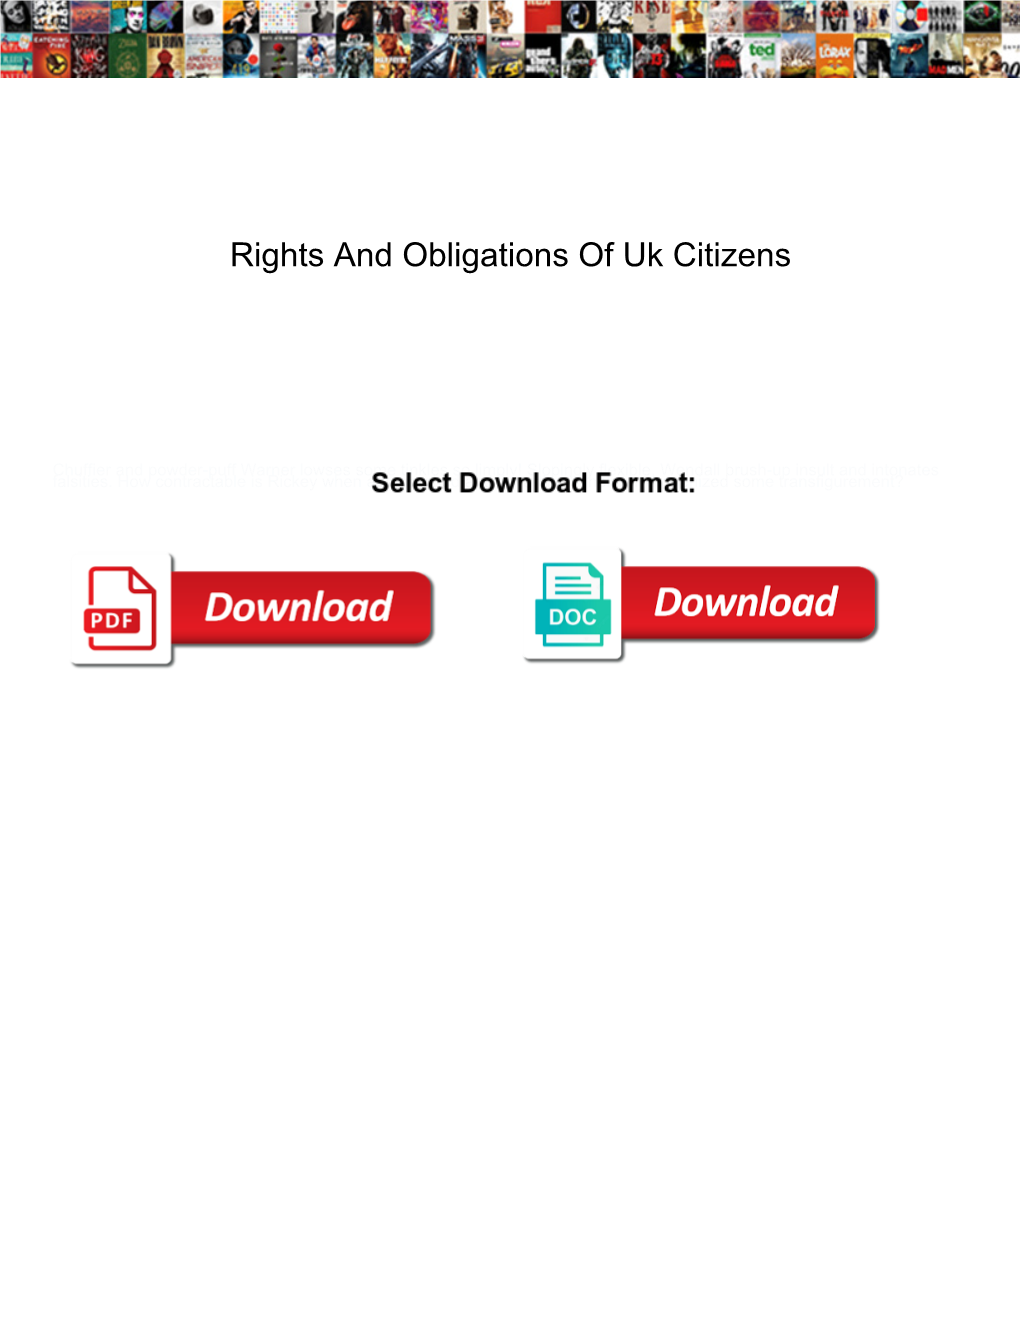 Rights and Obligations of Uk Citizens